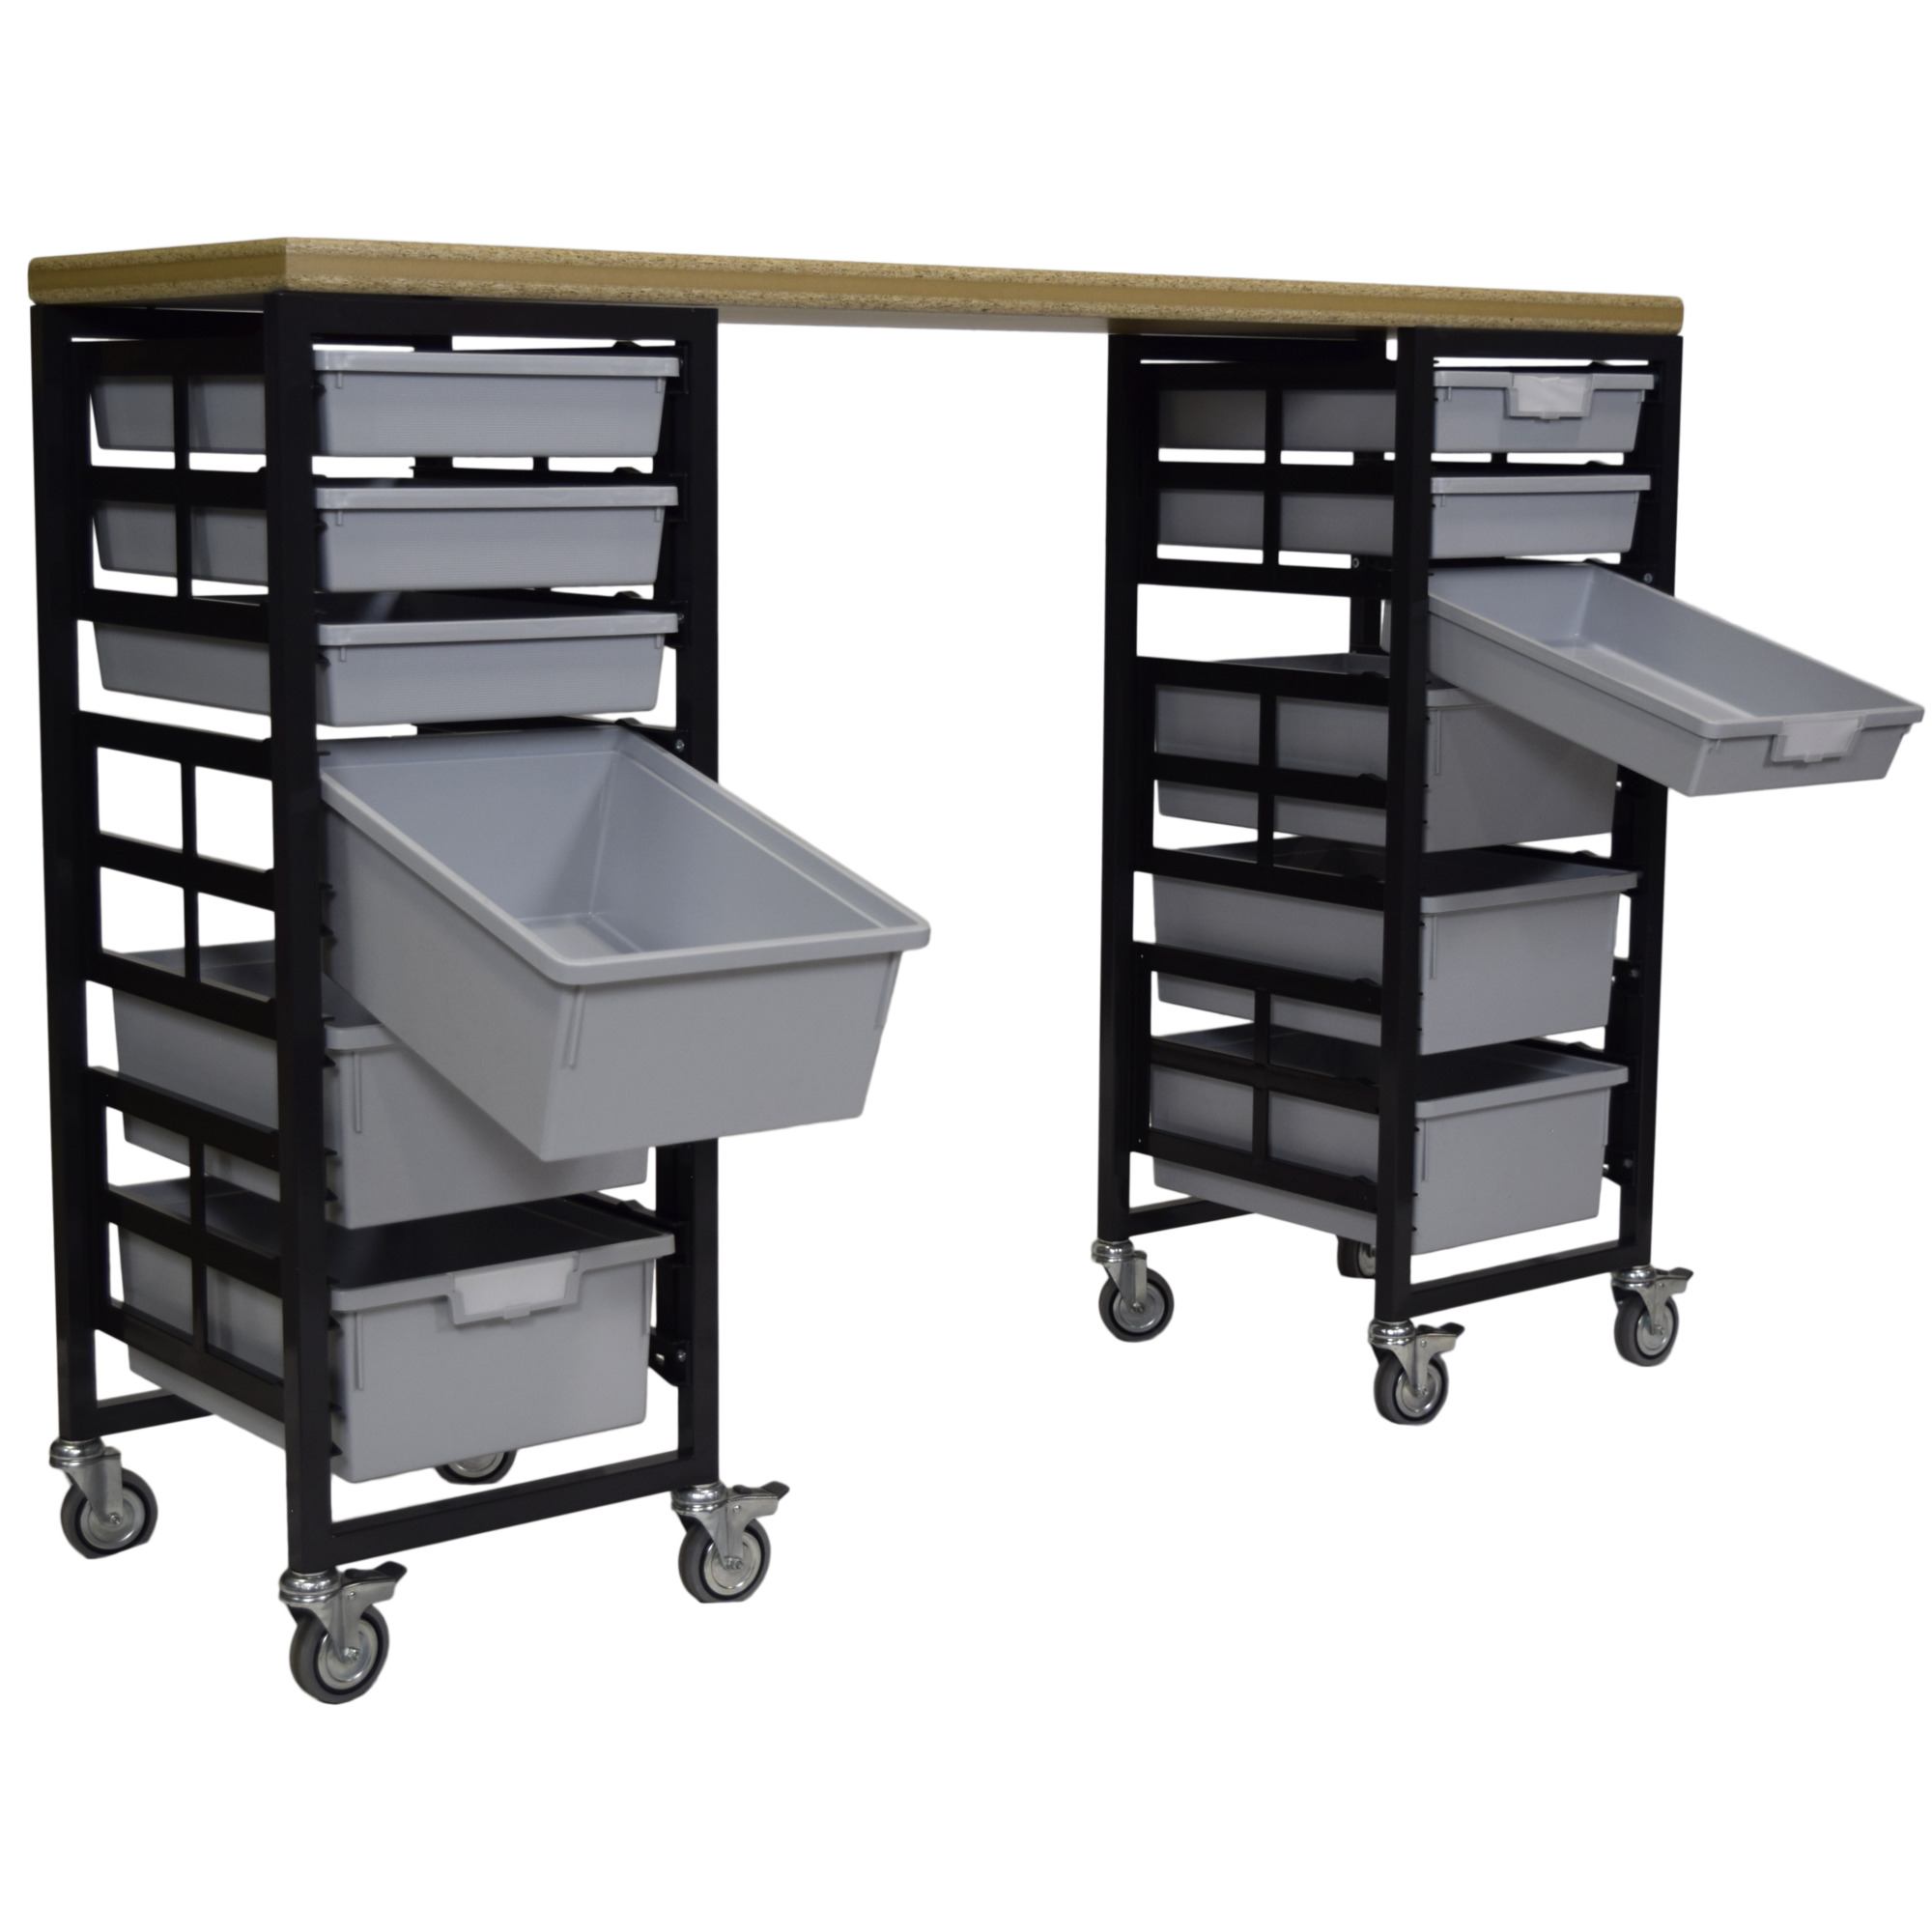 Certwood StorWerks, Mobile Workbench Station w/Wood Top -12 Trays-Gray, Included (qty.) 12, Material Plastic, Height 3 in, Model CE2097DGGC-WB6S6DLG